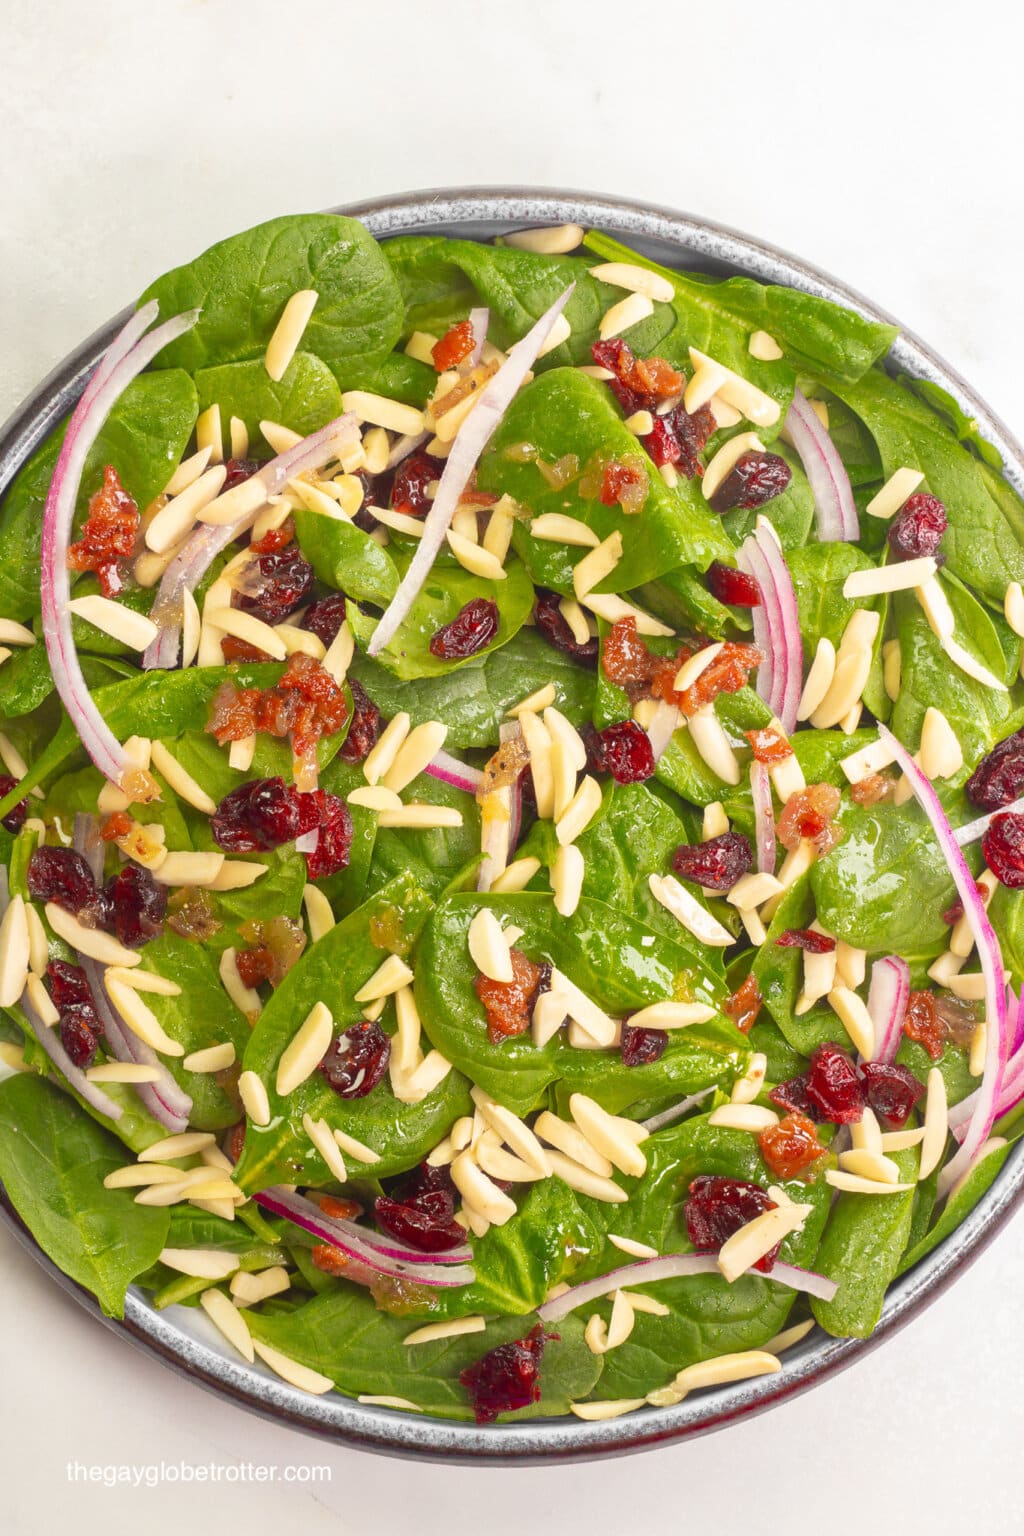 Spinach Cranberry Salad with Warm Bacon Dressing - The Gay Globetrotter